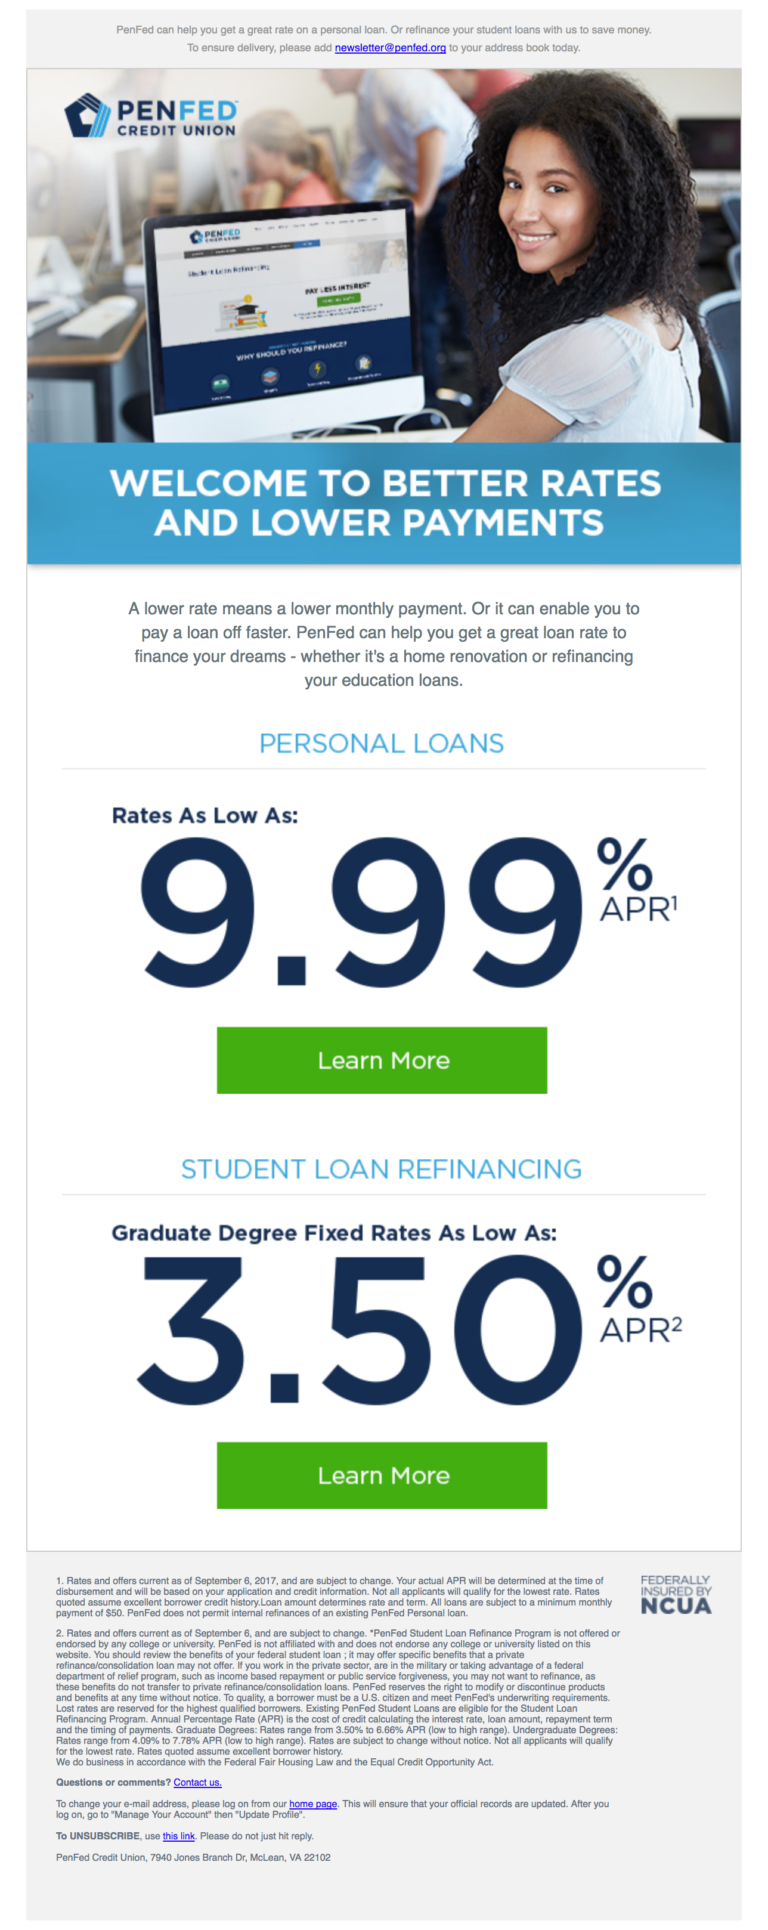 PenFed Indirect Auto Lending Email Series http